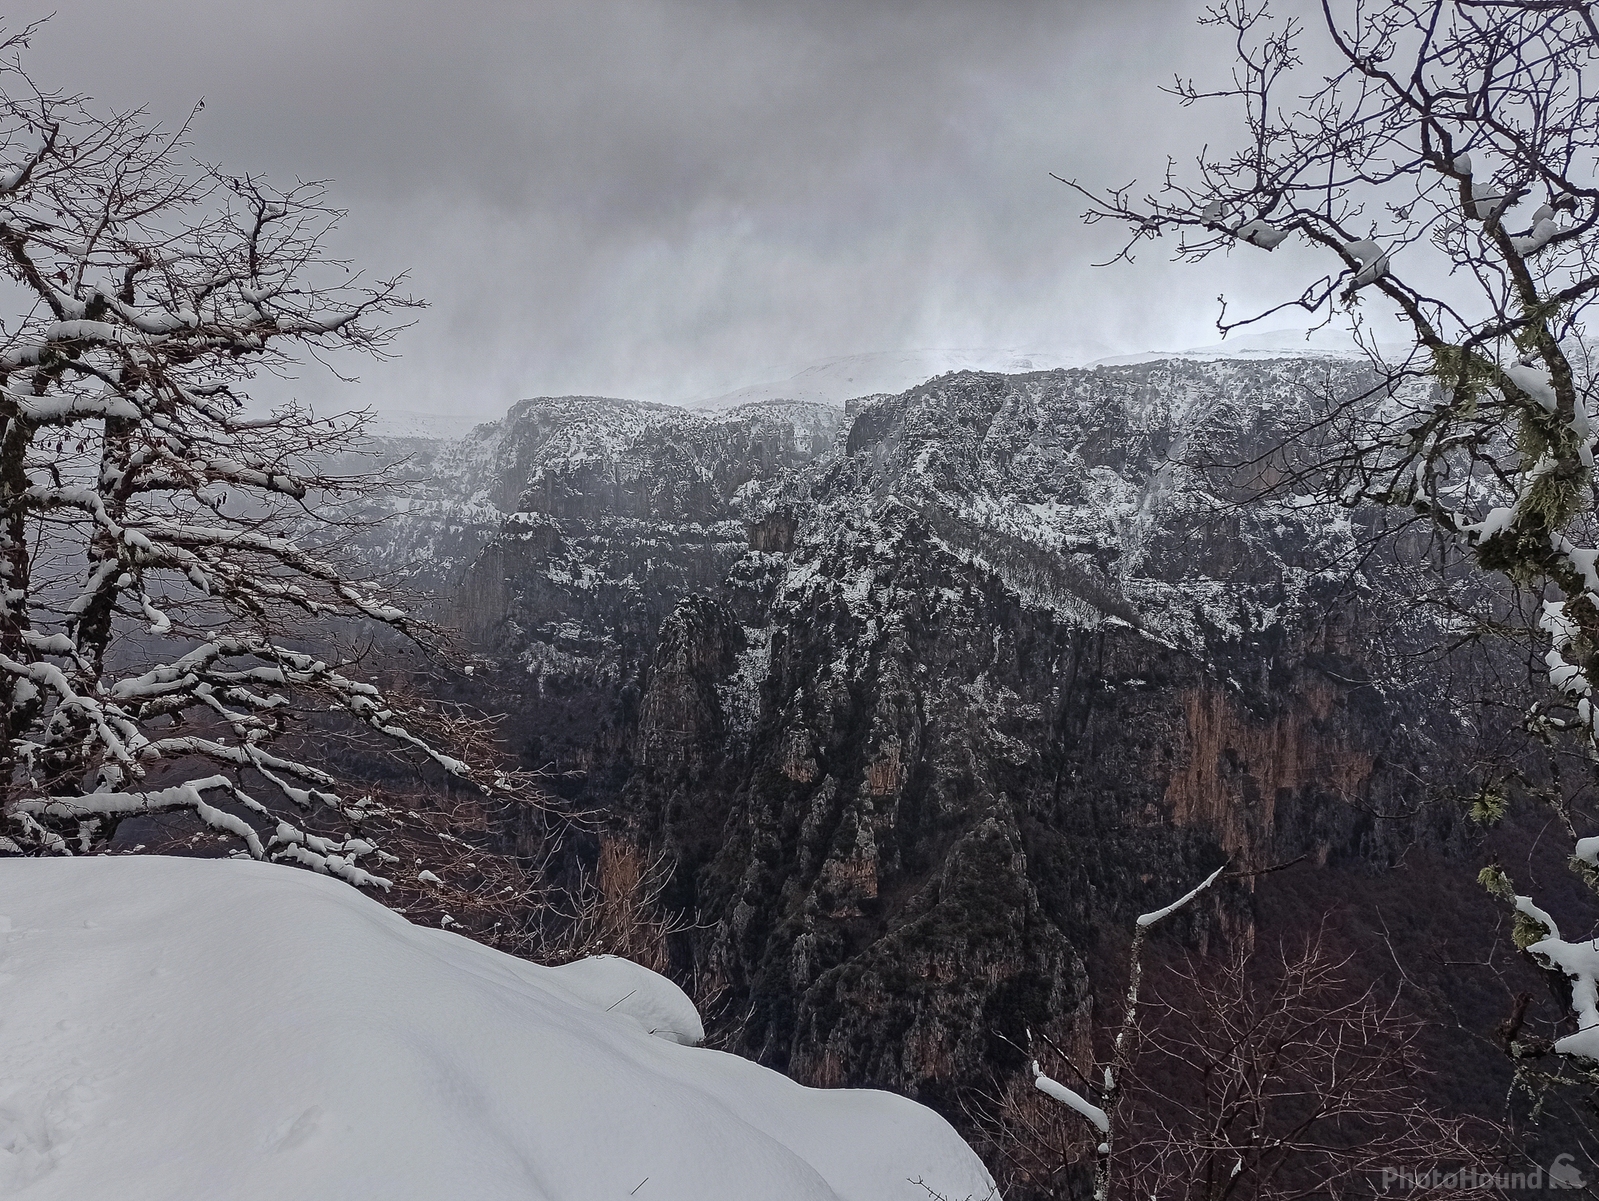 Image of Vikos gorge - Oxya viewpoint by Dancho Hristov